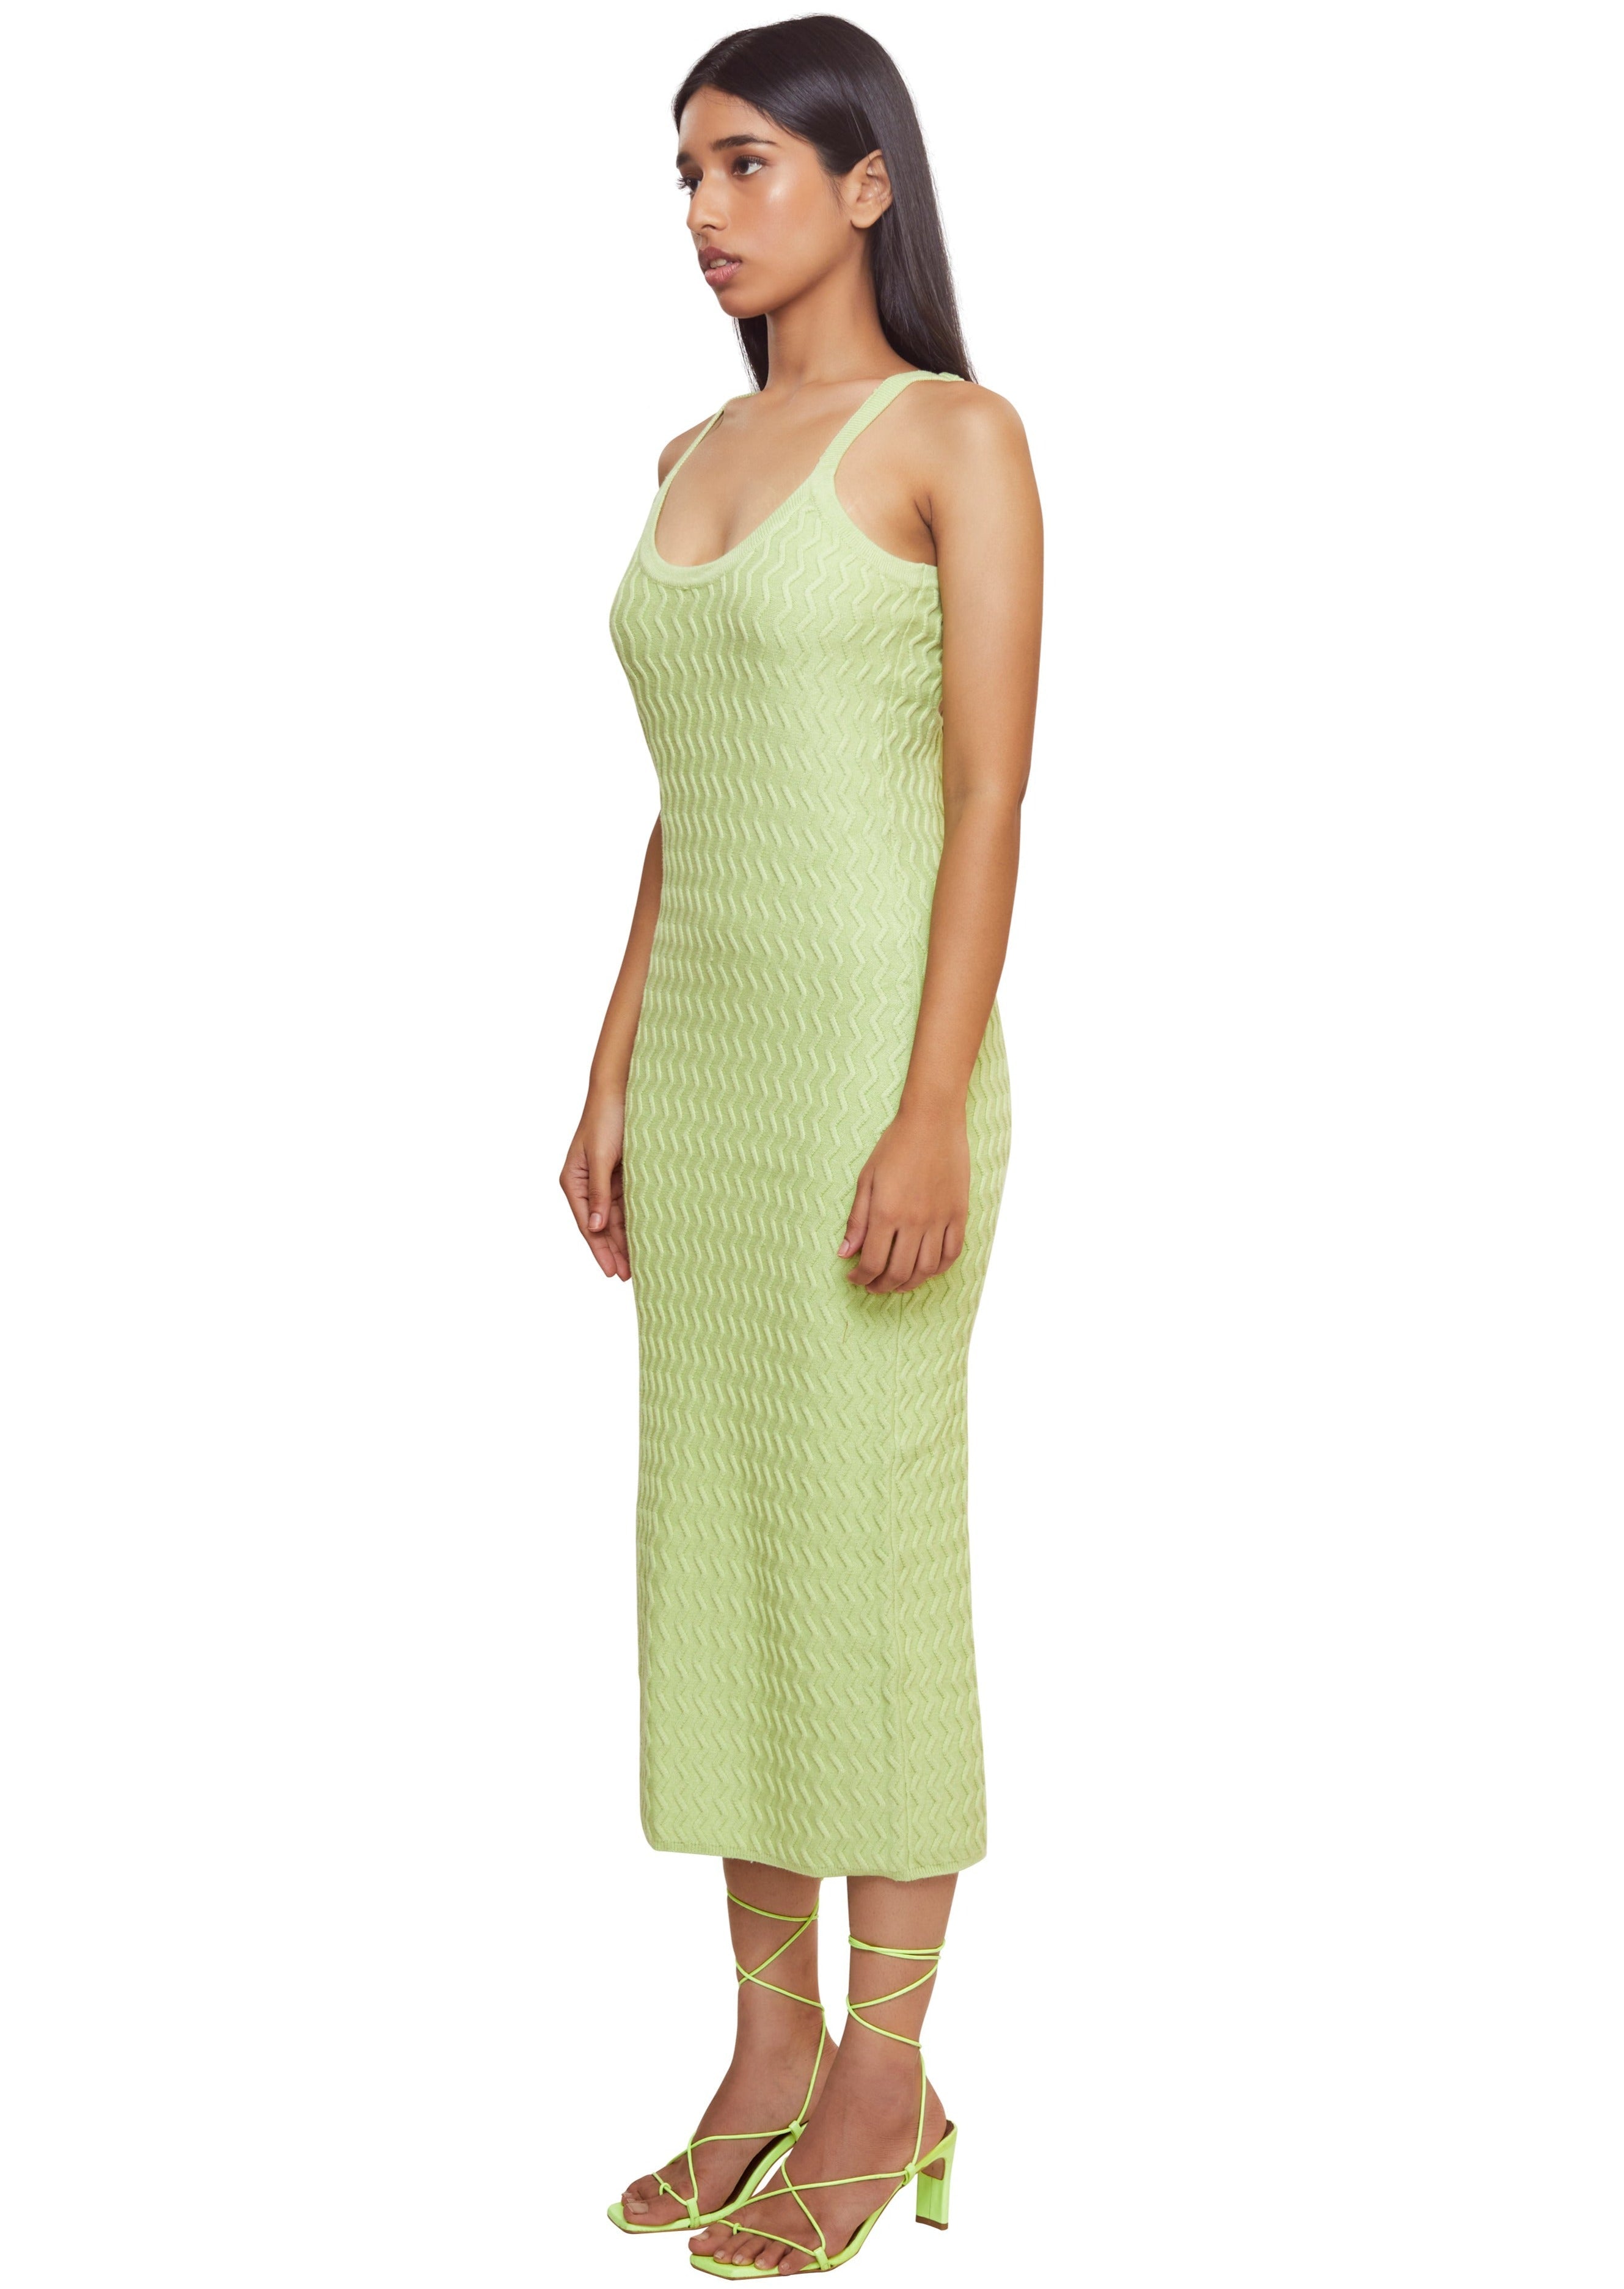 Mint classic hofs knitted slip dress shape w/ wavy rib from the brand House Of Sunny